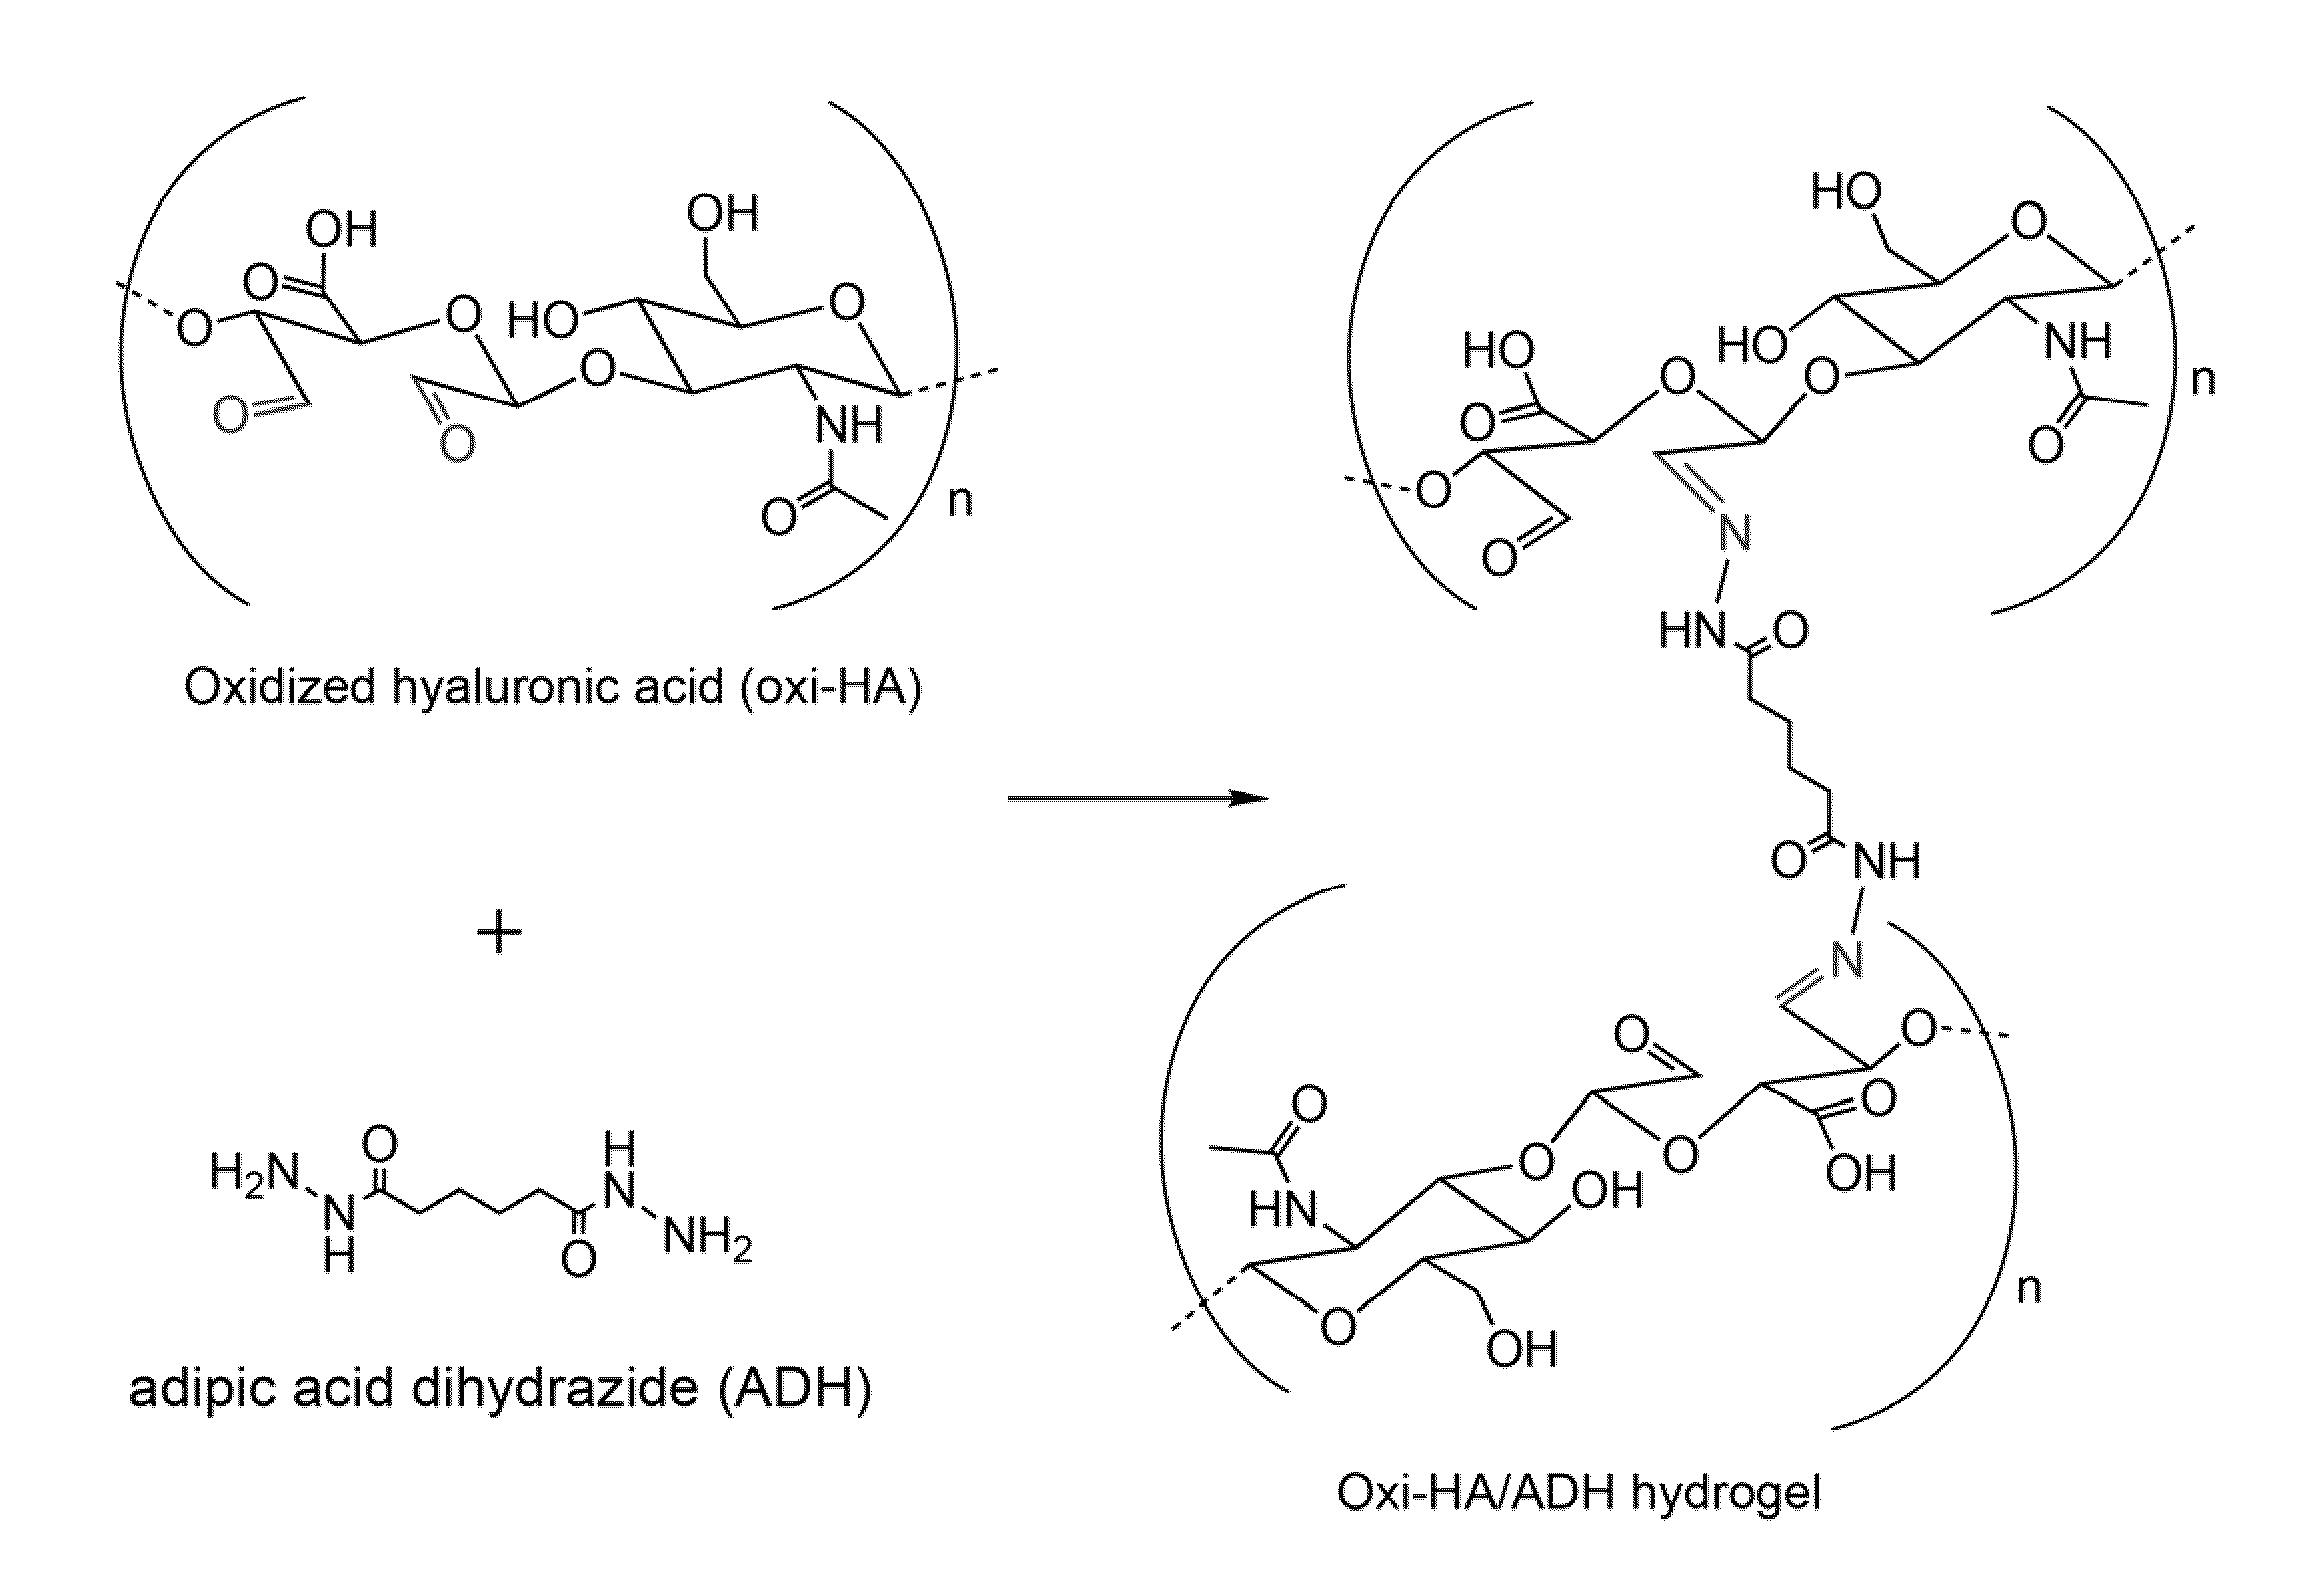 Cross-linked oxidated hyaluronic acid for use as a vitreous substitute